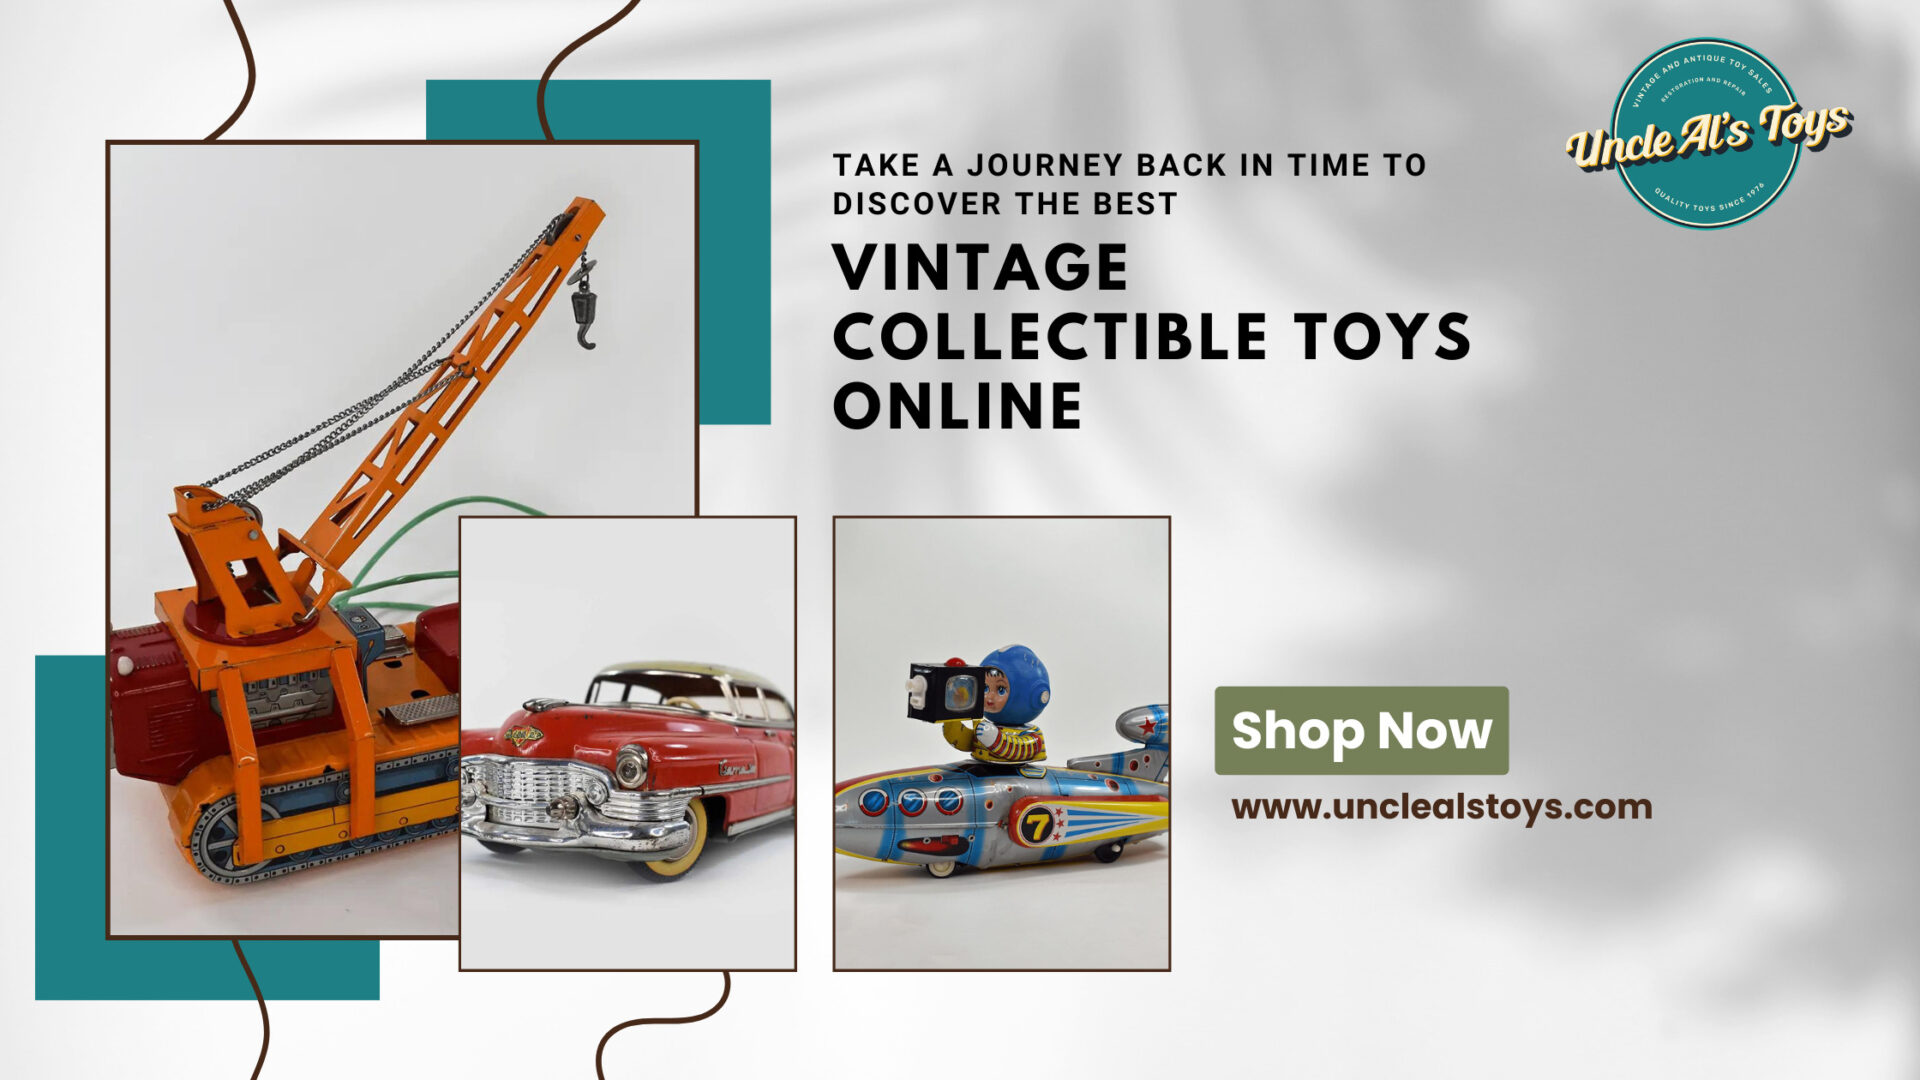 Take a journey back in time to discover the best Collectible Toys